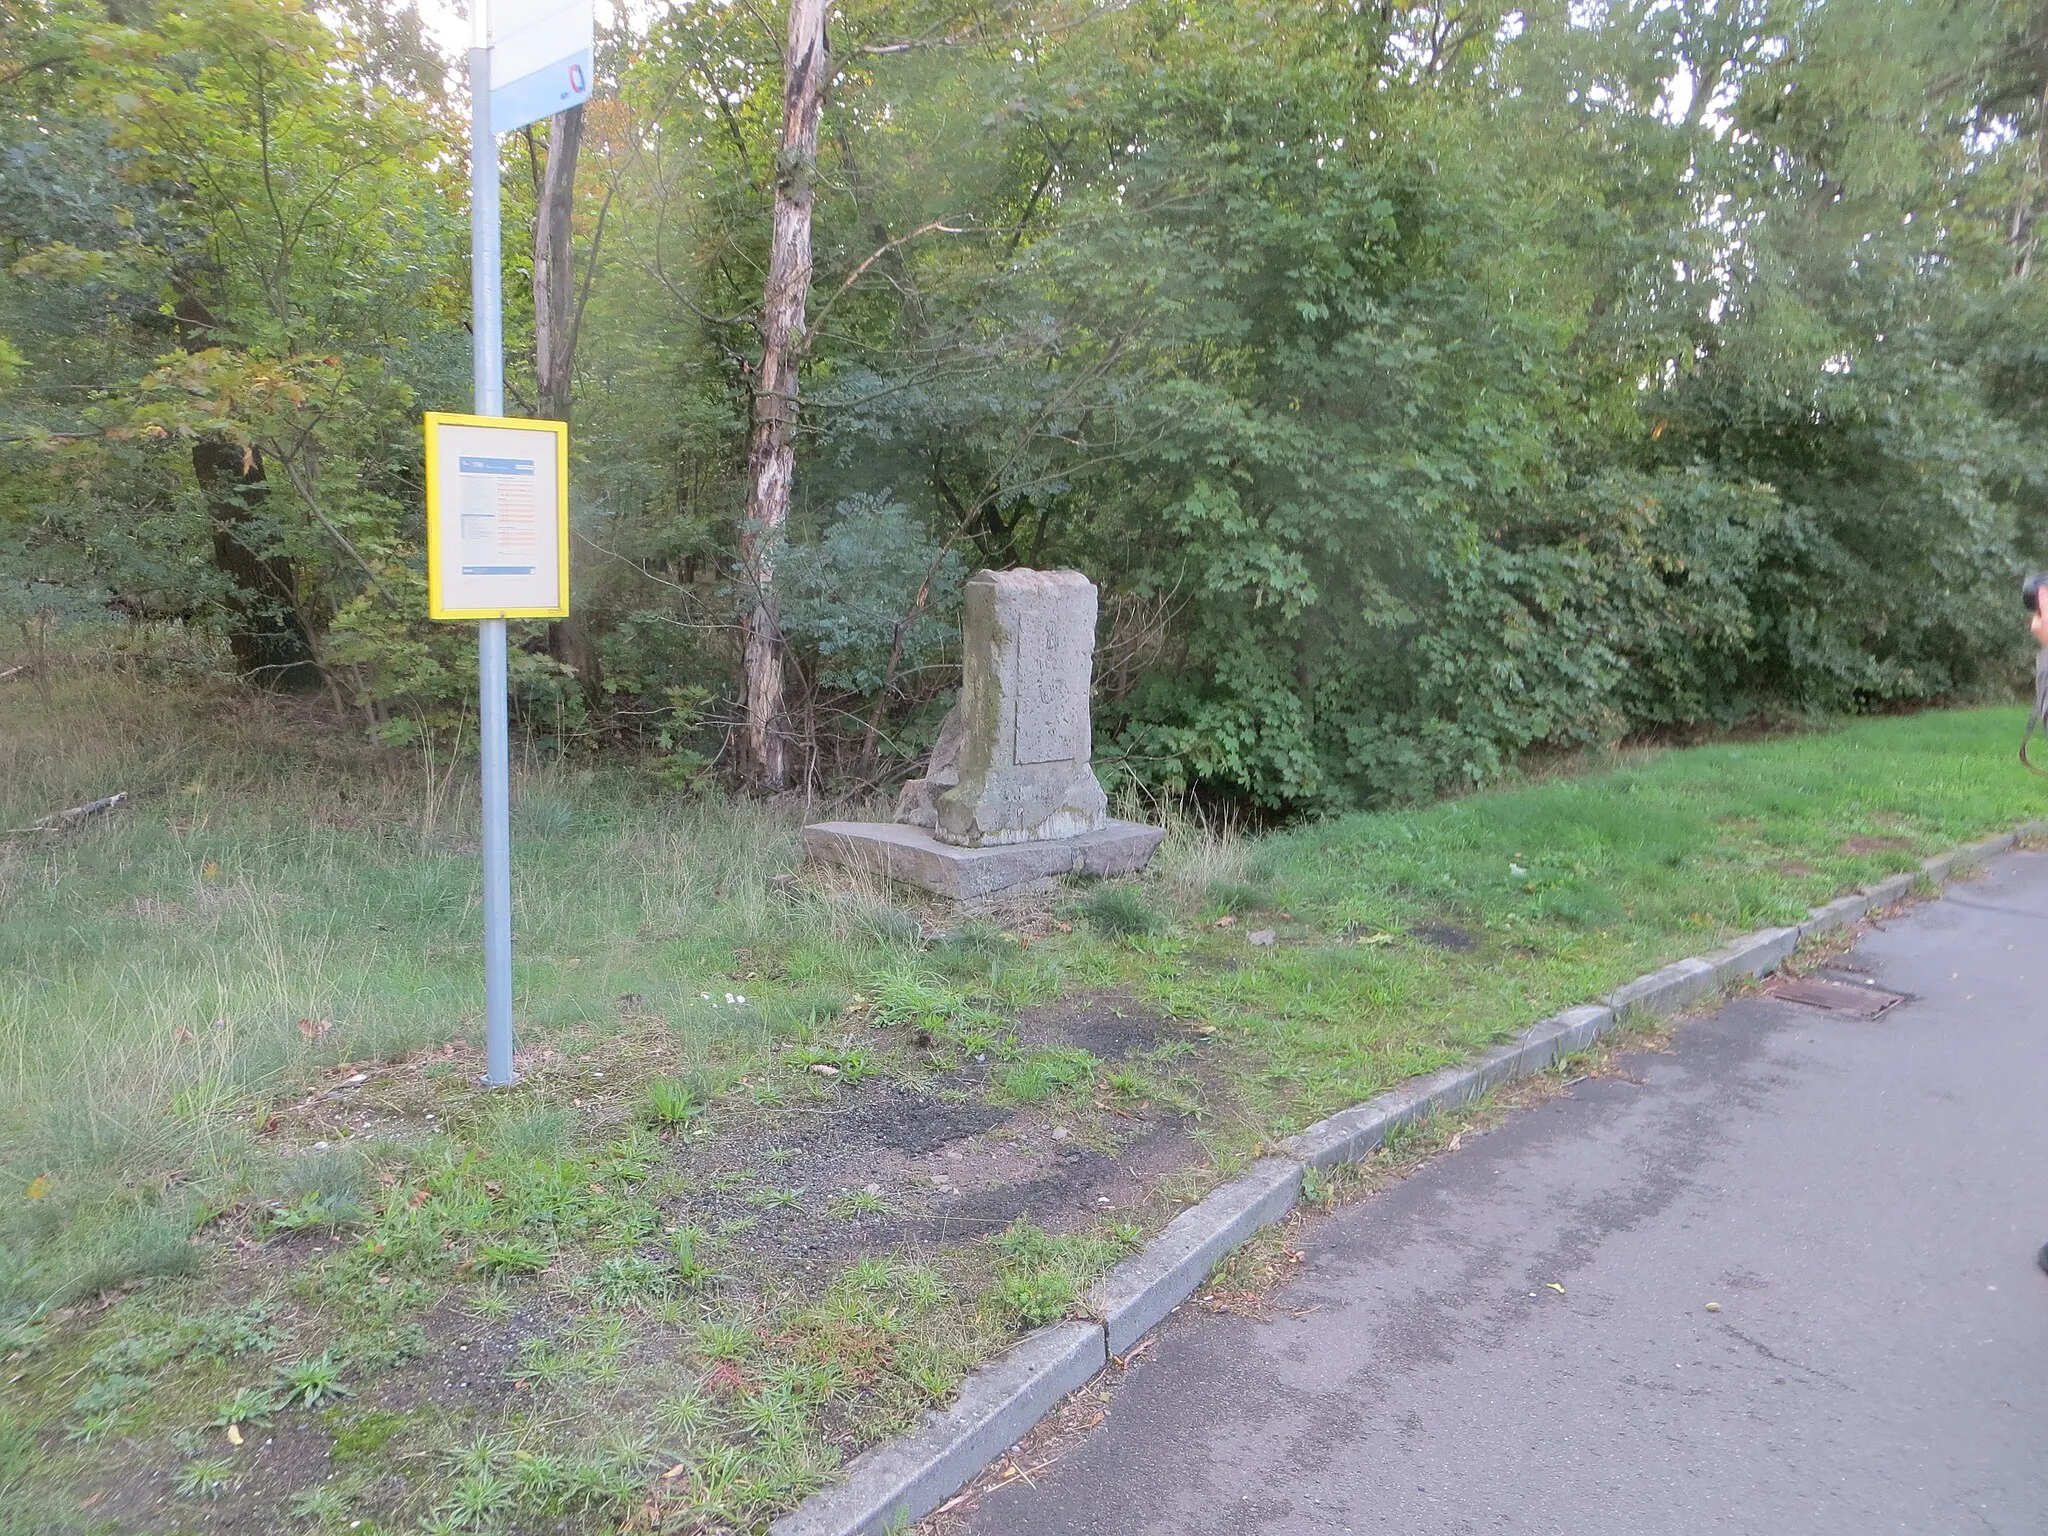 Photo showing: This media shows the protected monument of Saxony with the ID 08974344 KDSa/08974344(other).